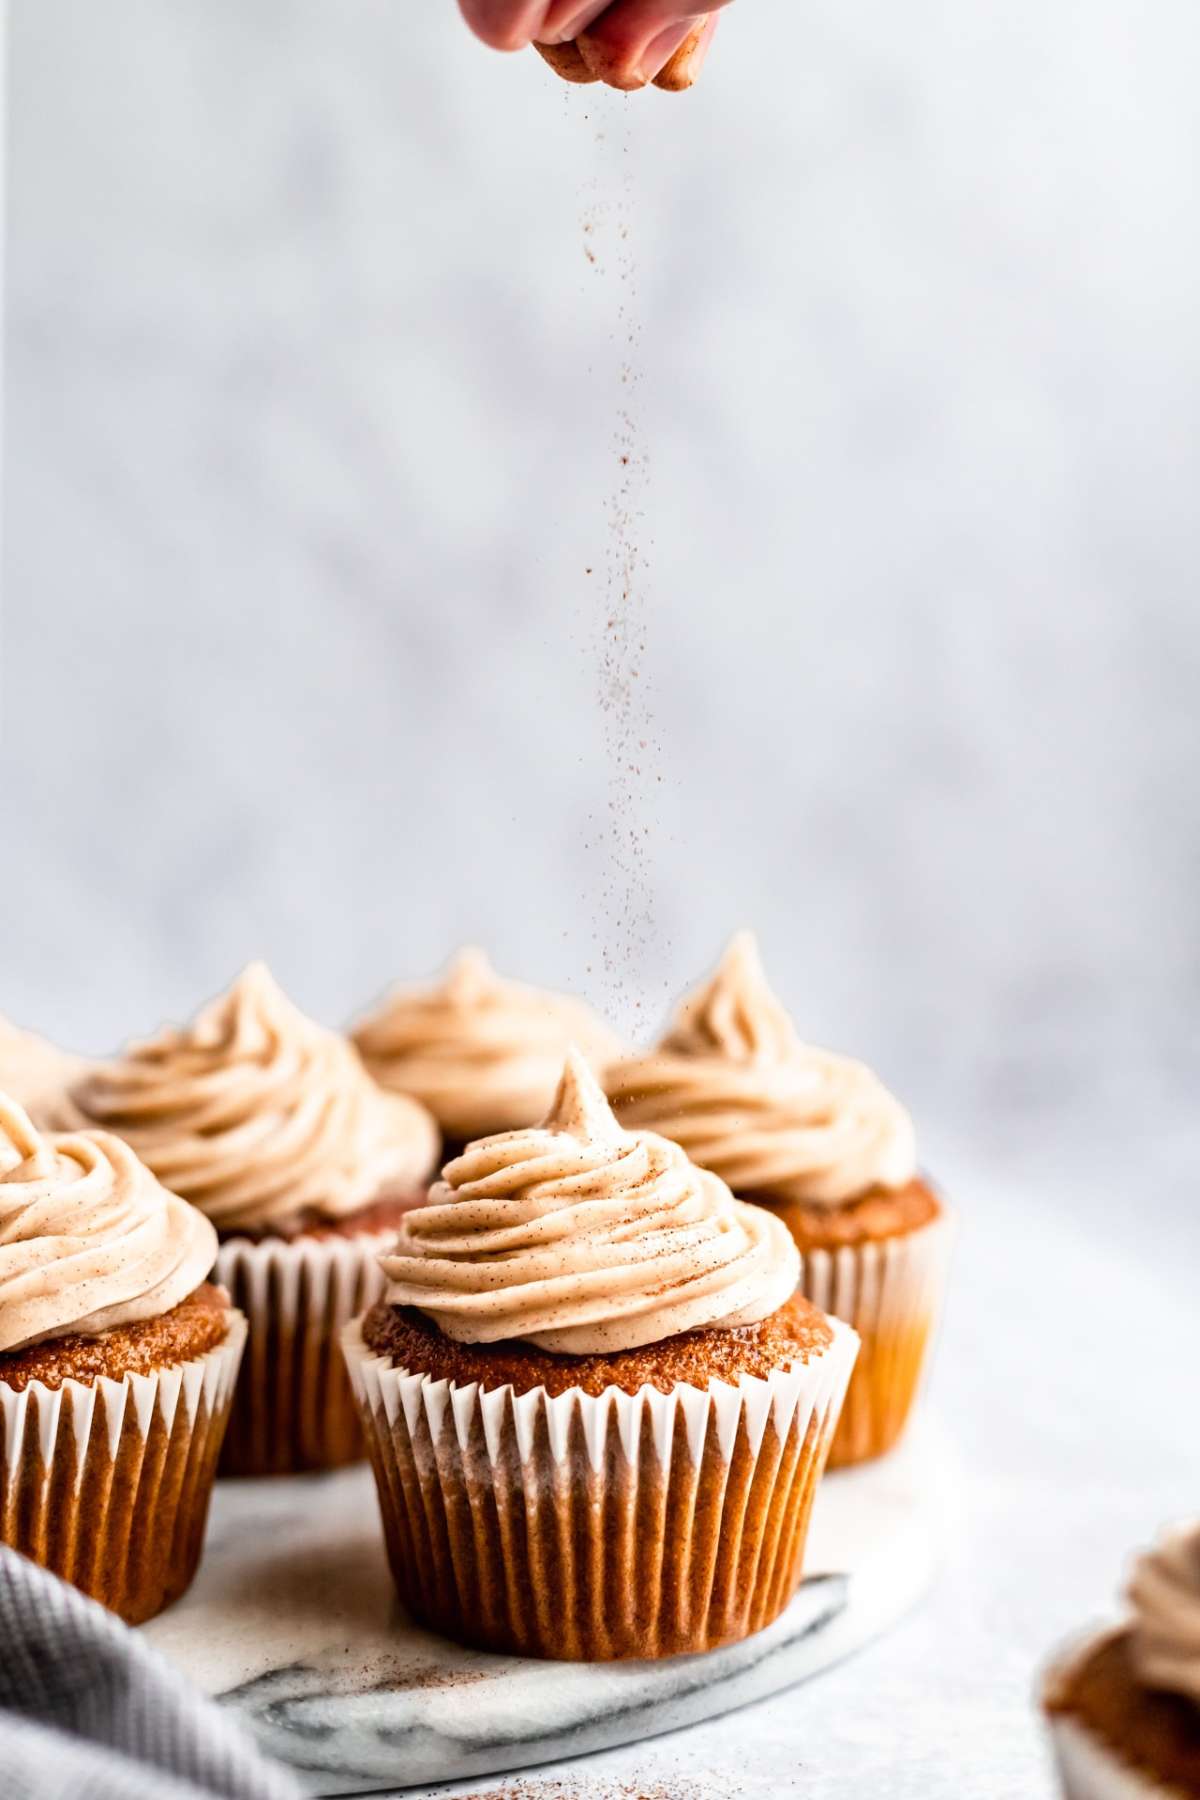 Sprinkling cinnamon over the top of frosted cupcakes.